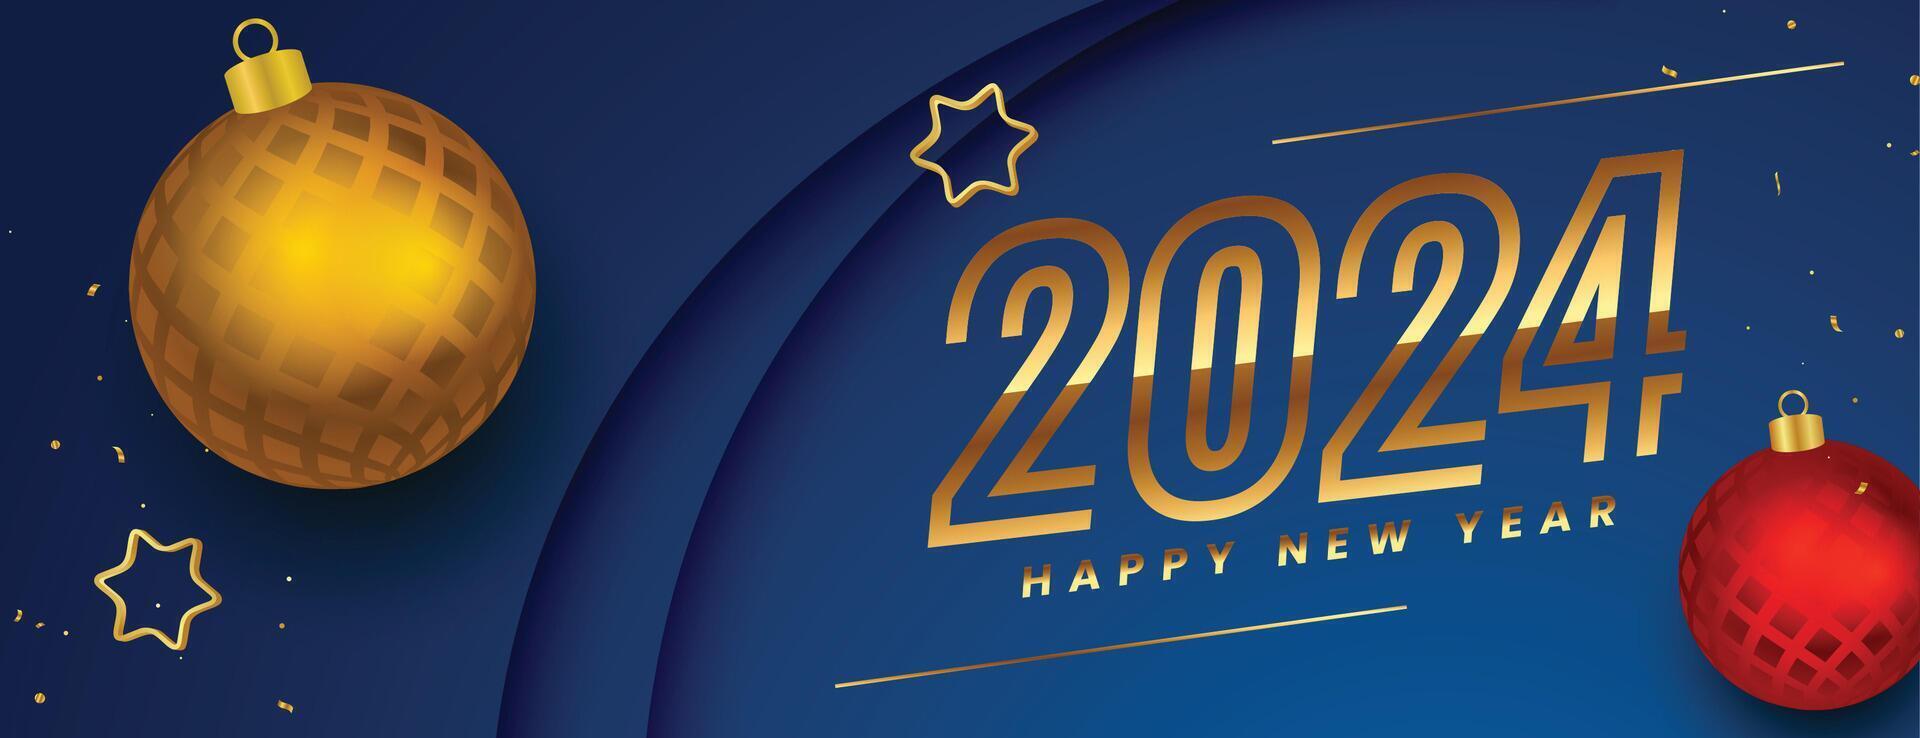 2024 new year greeting wallpaper with 3d ball and star vector